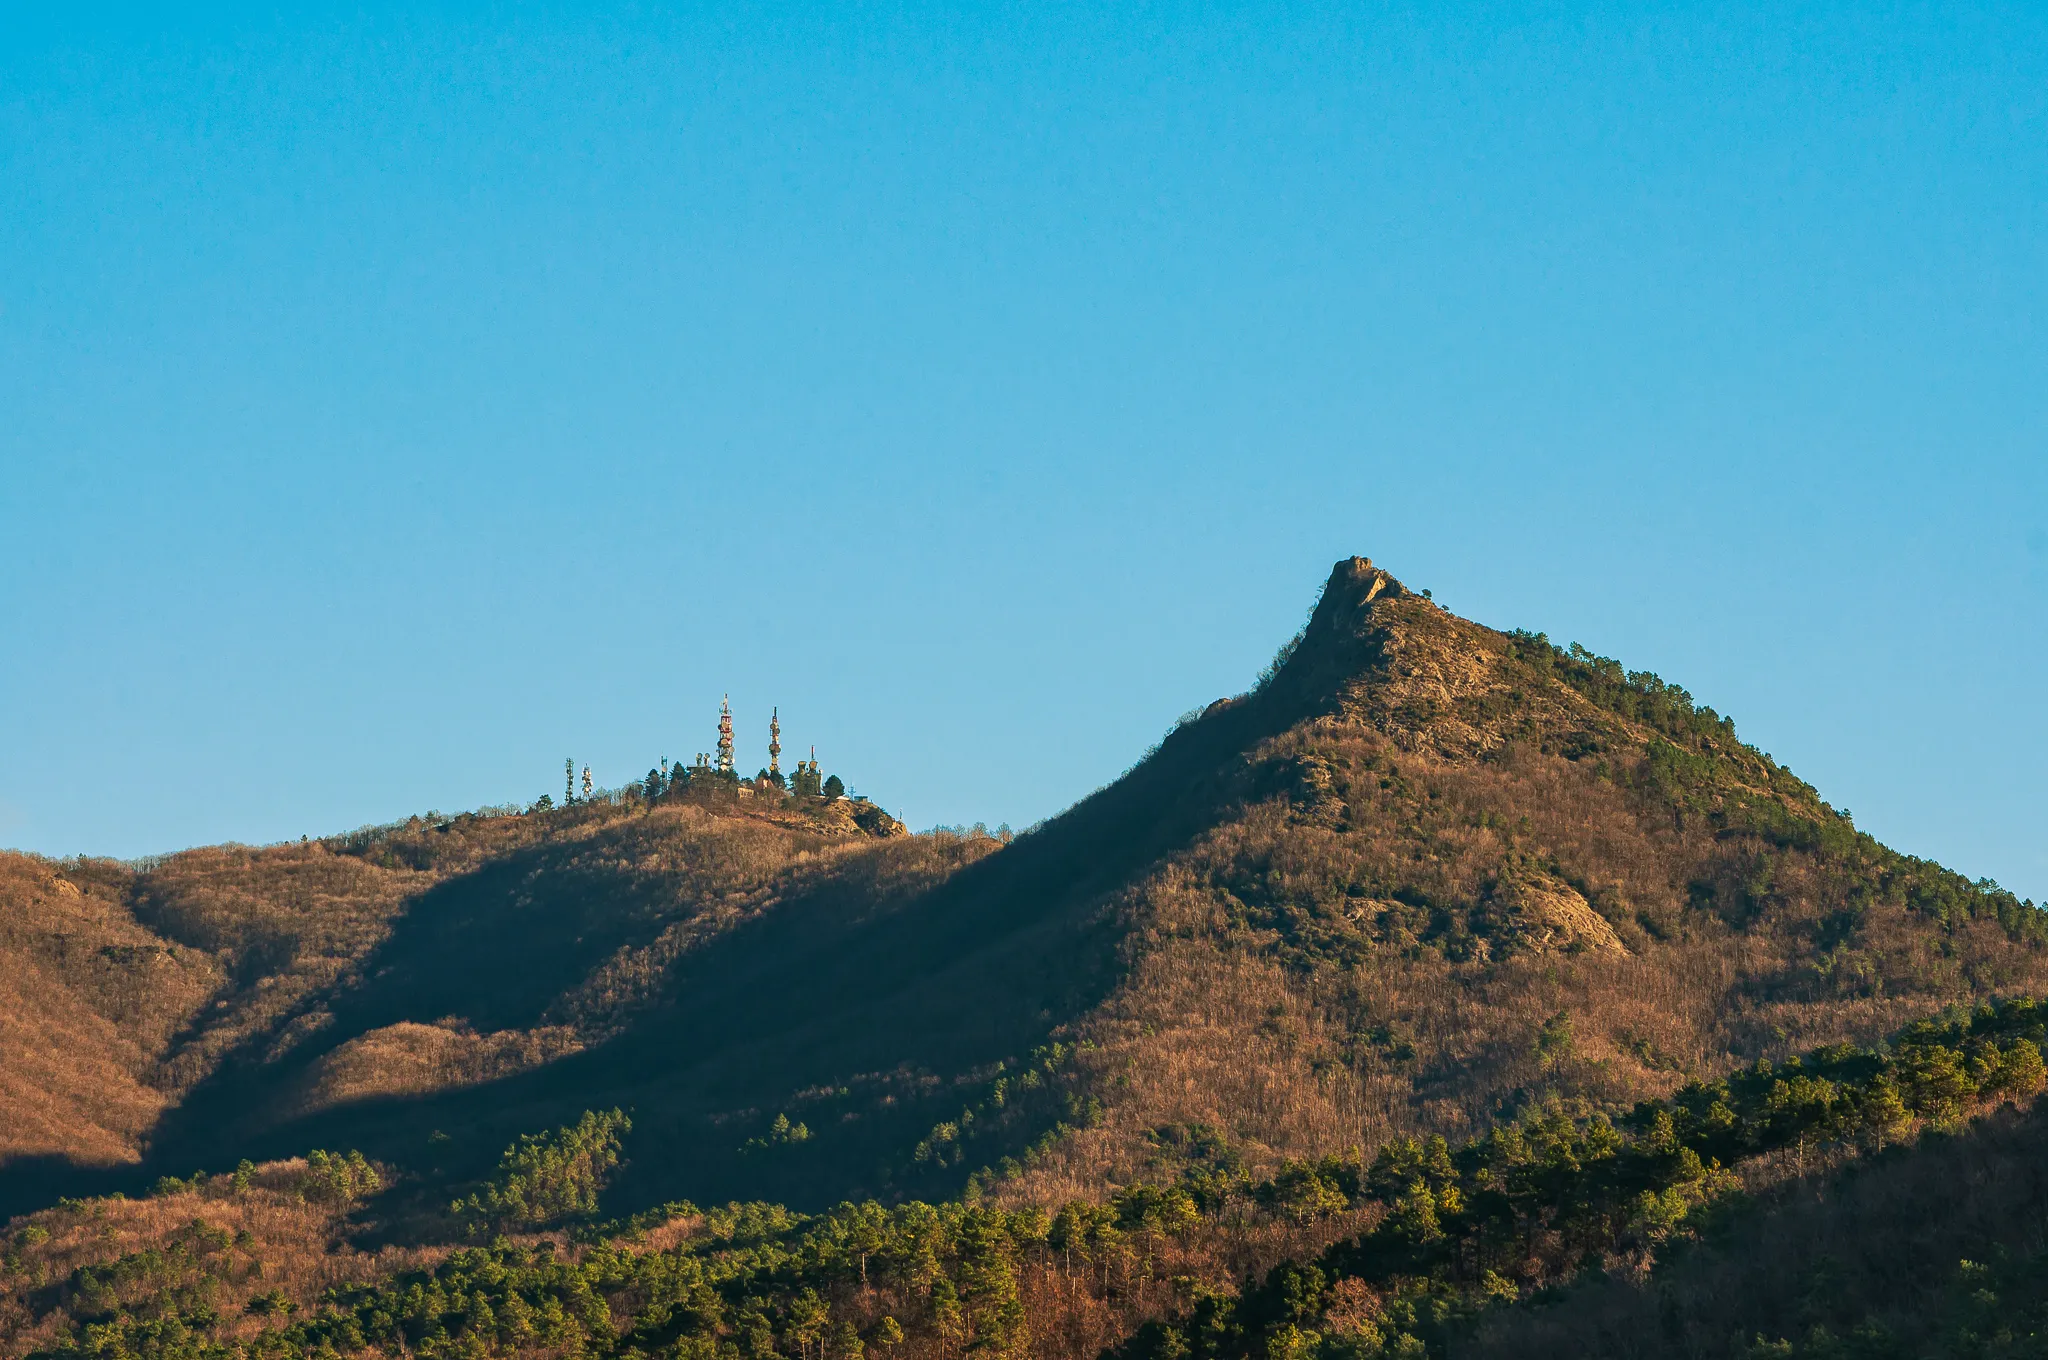 Photo showing: In the foreground the summit of Mount Pietra di Vasca; in the background Mount San Nicolao, topped by communication devices.